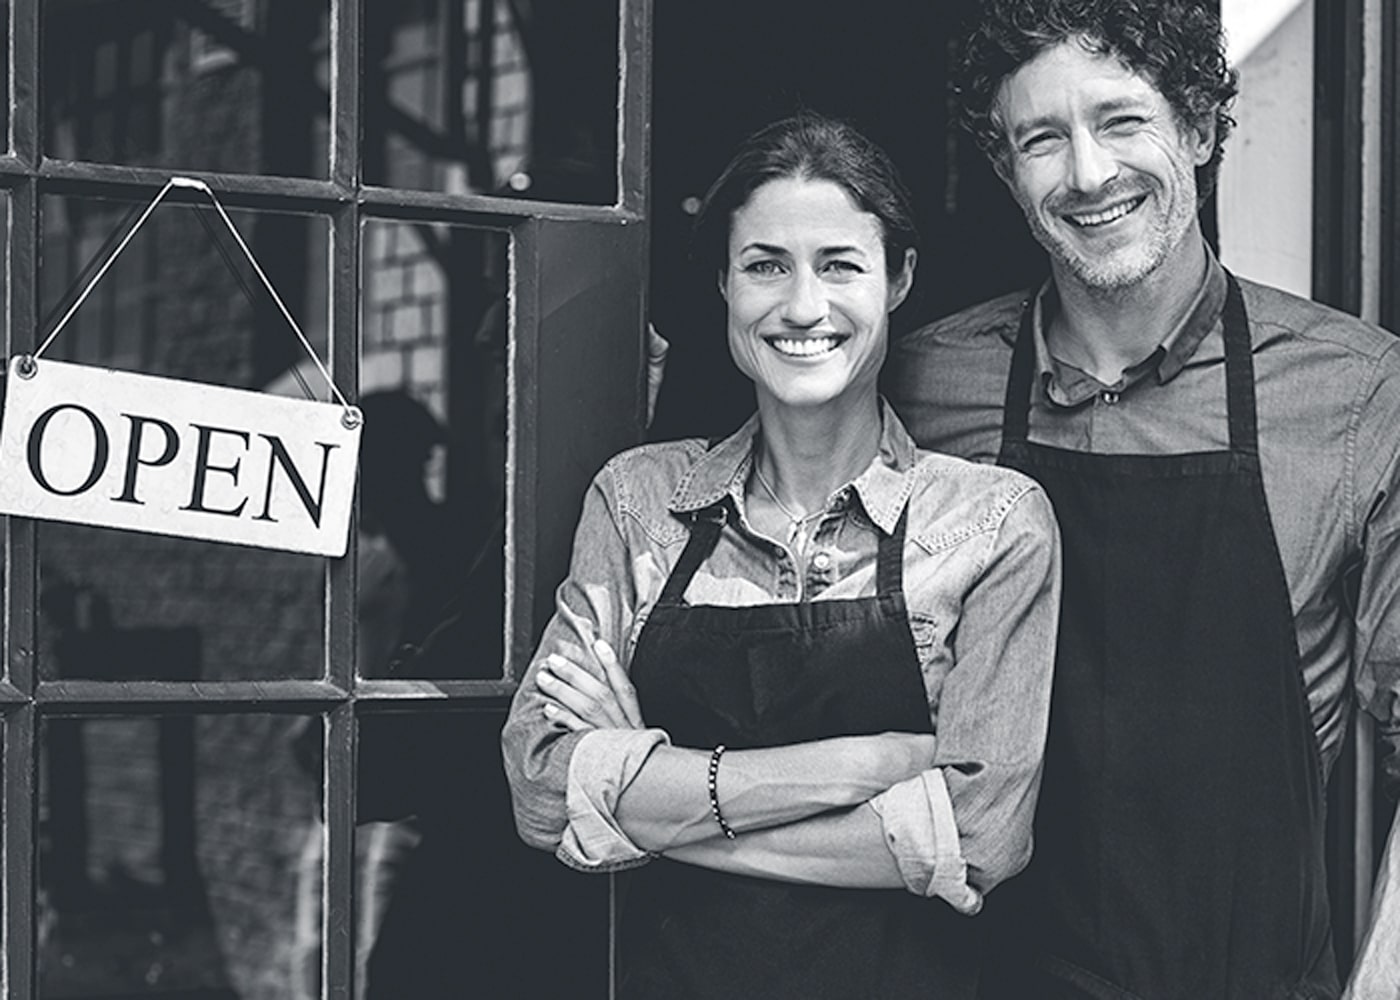 Smiling man and woman in aprons standing in front of business with open sign